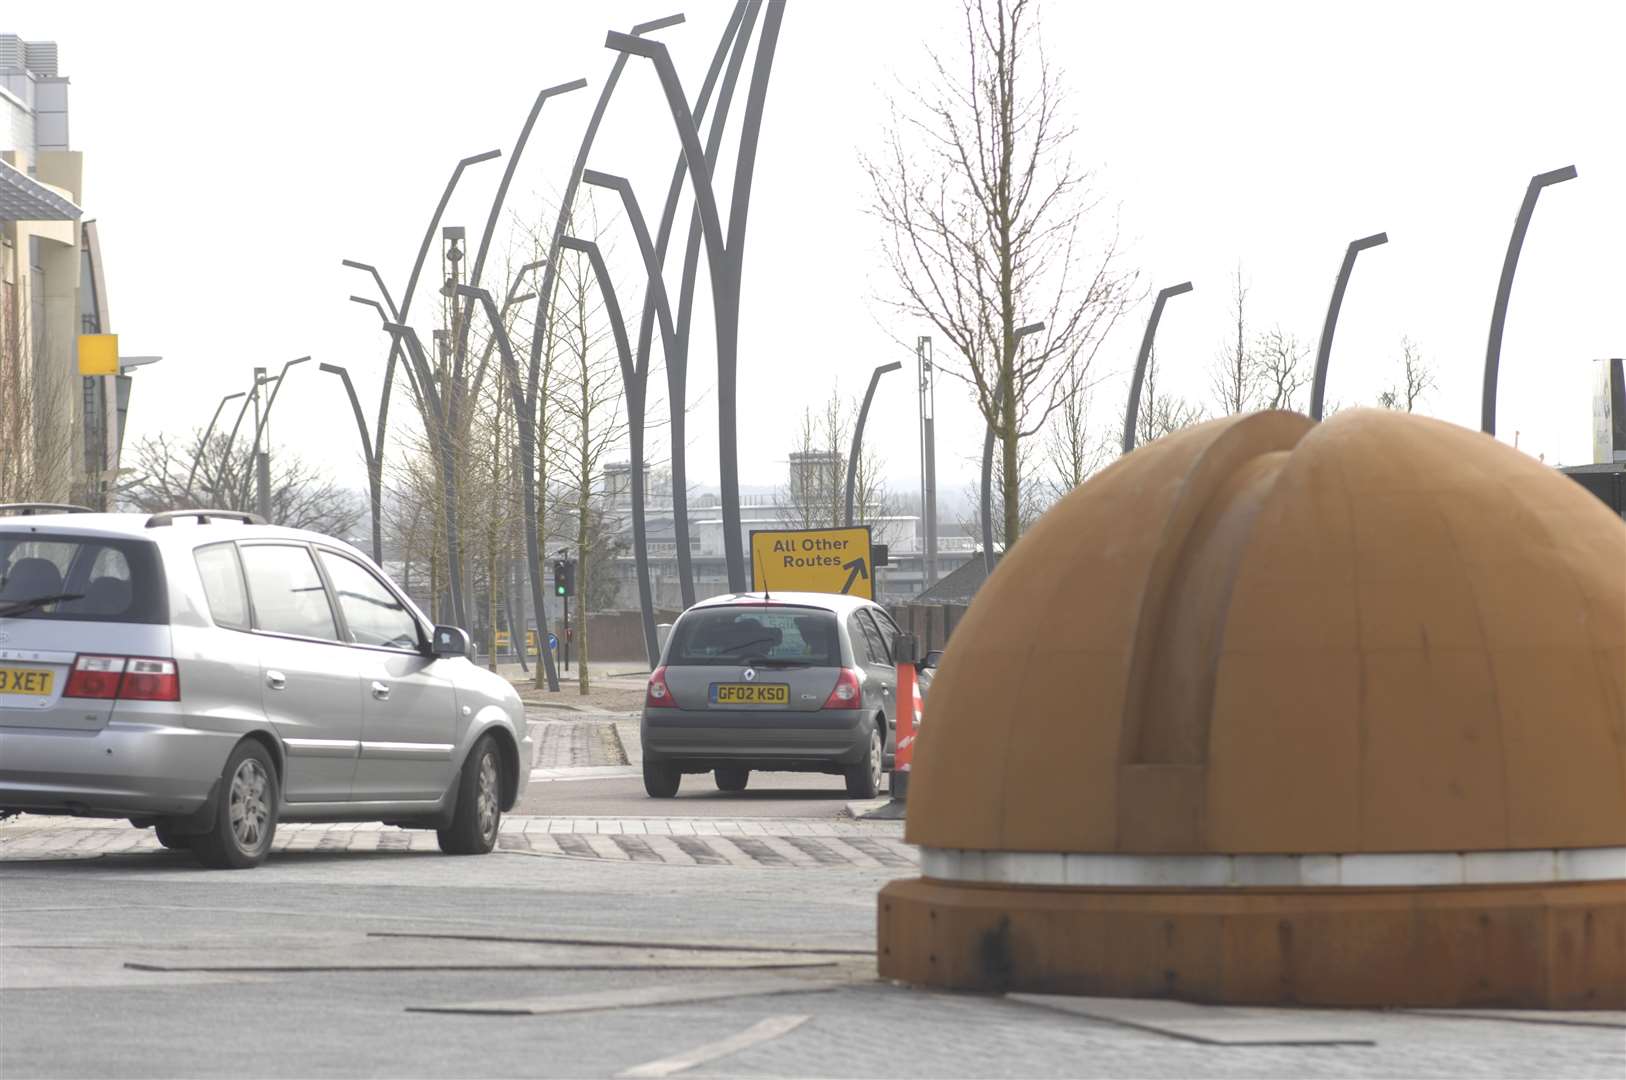 The 'bolt' roundabout in Ashford's 'Shared Space', pictured in 2009